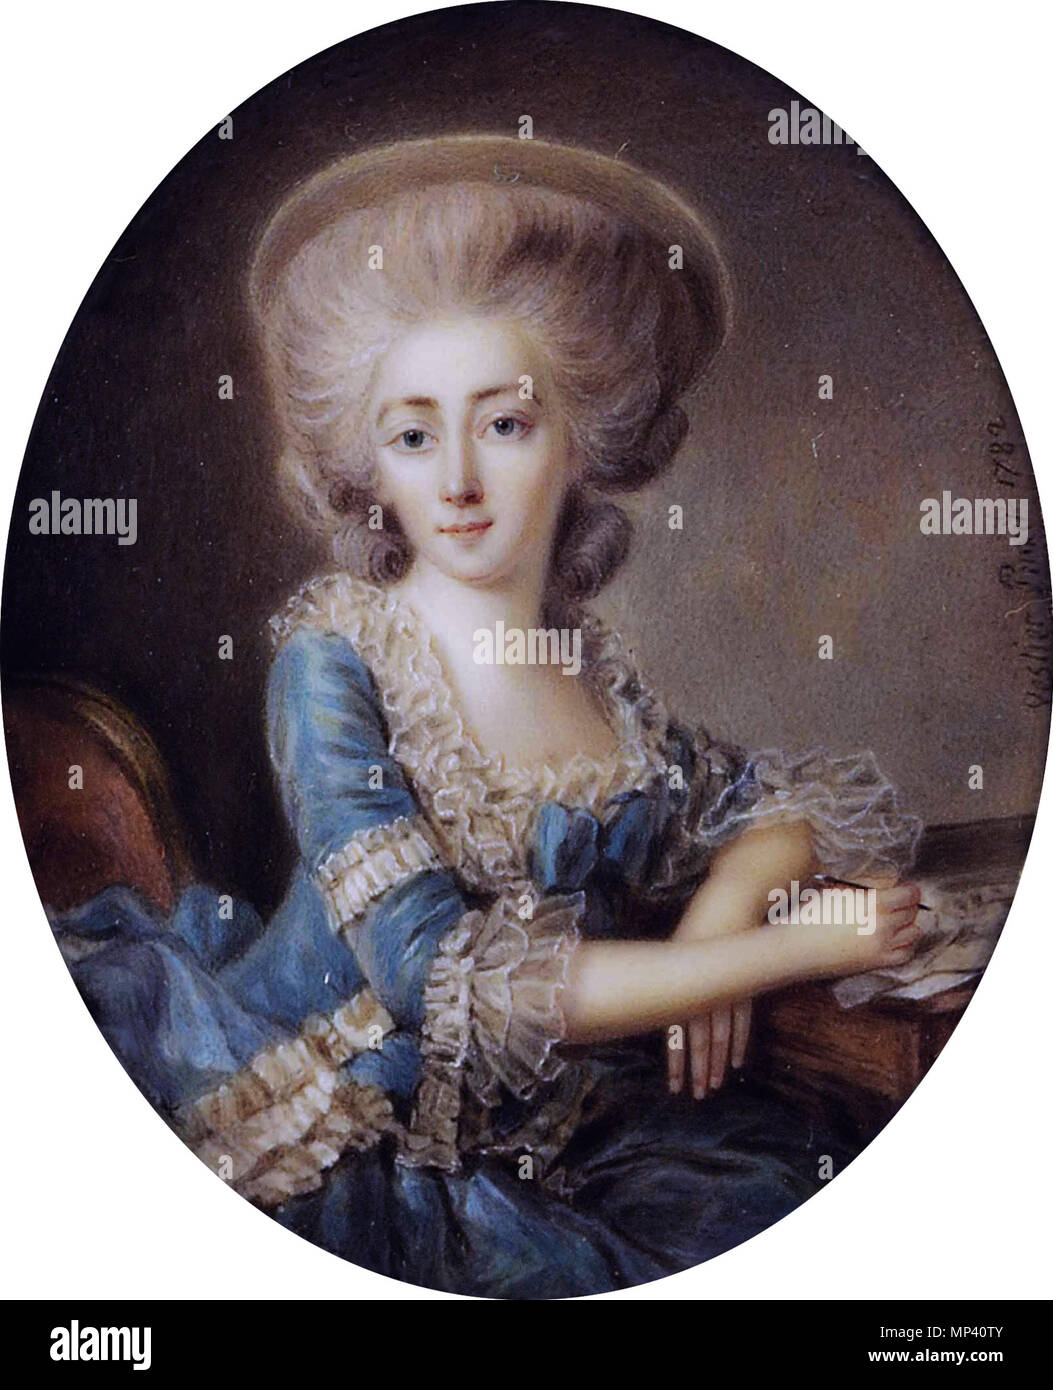 Madame de Montesson (1738-1806)  *on ivory  *oval 8.1 cm  *signed c.r.: Vestier Pinxit 1782    . English: Madame de Montesson (1738-1806) on ivory oval 8.1 cm signed c.r.: Vestier Pinxit 1782  . 1782.   Antoine Vestier  (1740–1824)     Alternative names M. Vestier; Vestier  Description French painter  Date of birth/death 28 April 1740 24 December 1824  Location of birth/death Avallon Paris  Work location Amsterdam, London, Paris  Authority control  : Q2389104 VIAF: 5199138 ISNI: 0000 0000 6656 3296 ULAN: 500016254 LCCN: nr90010017 GND: 118934775 WorldCat 839 Madame de Montesson (1738-1806), by Stock Photo